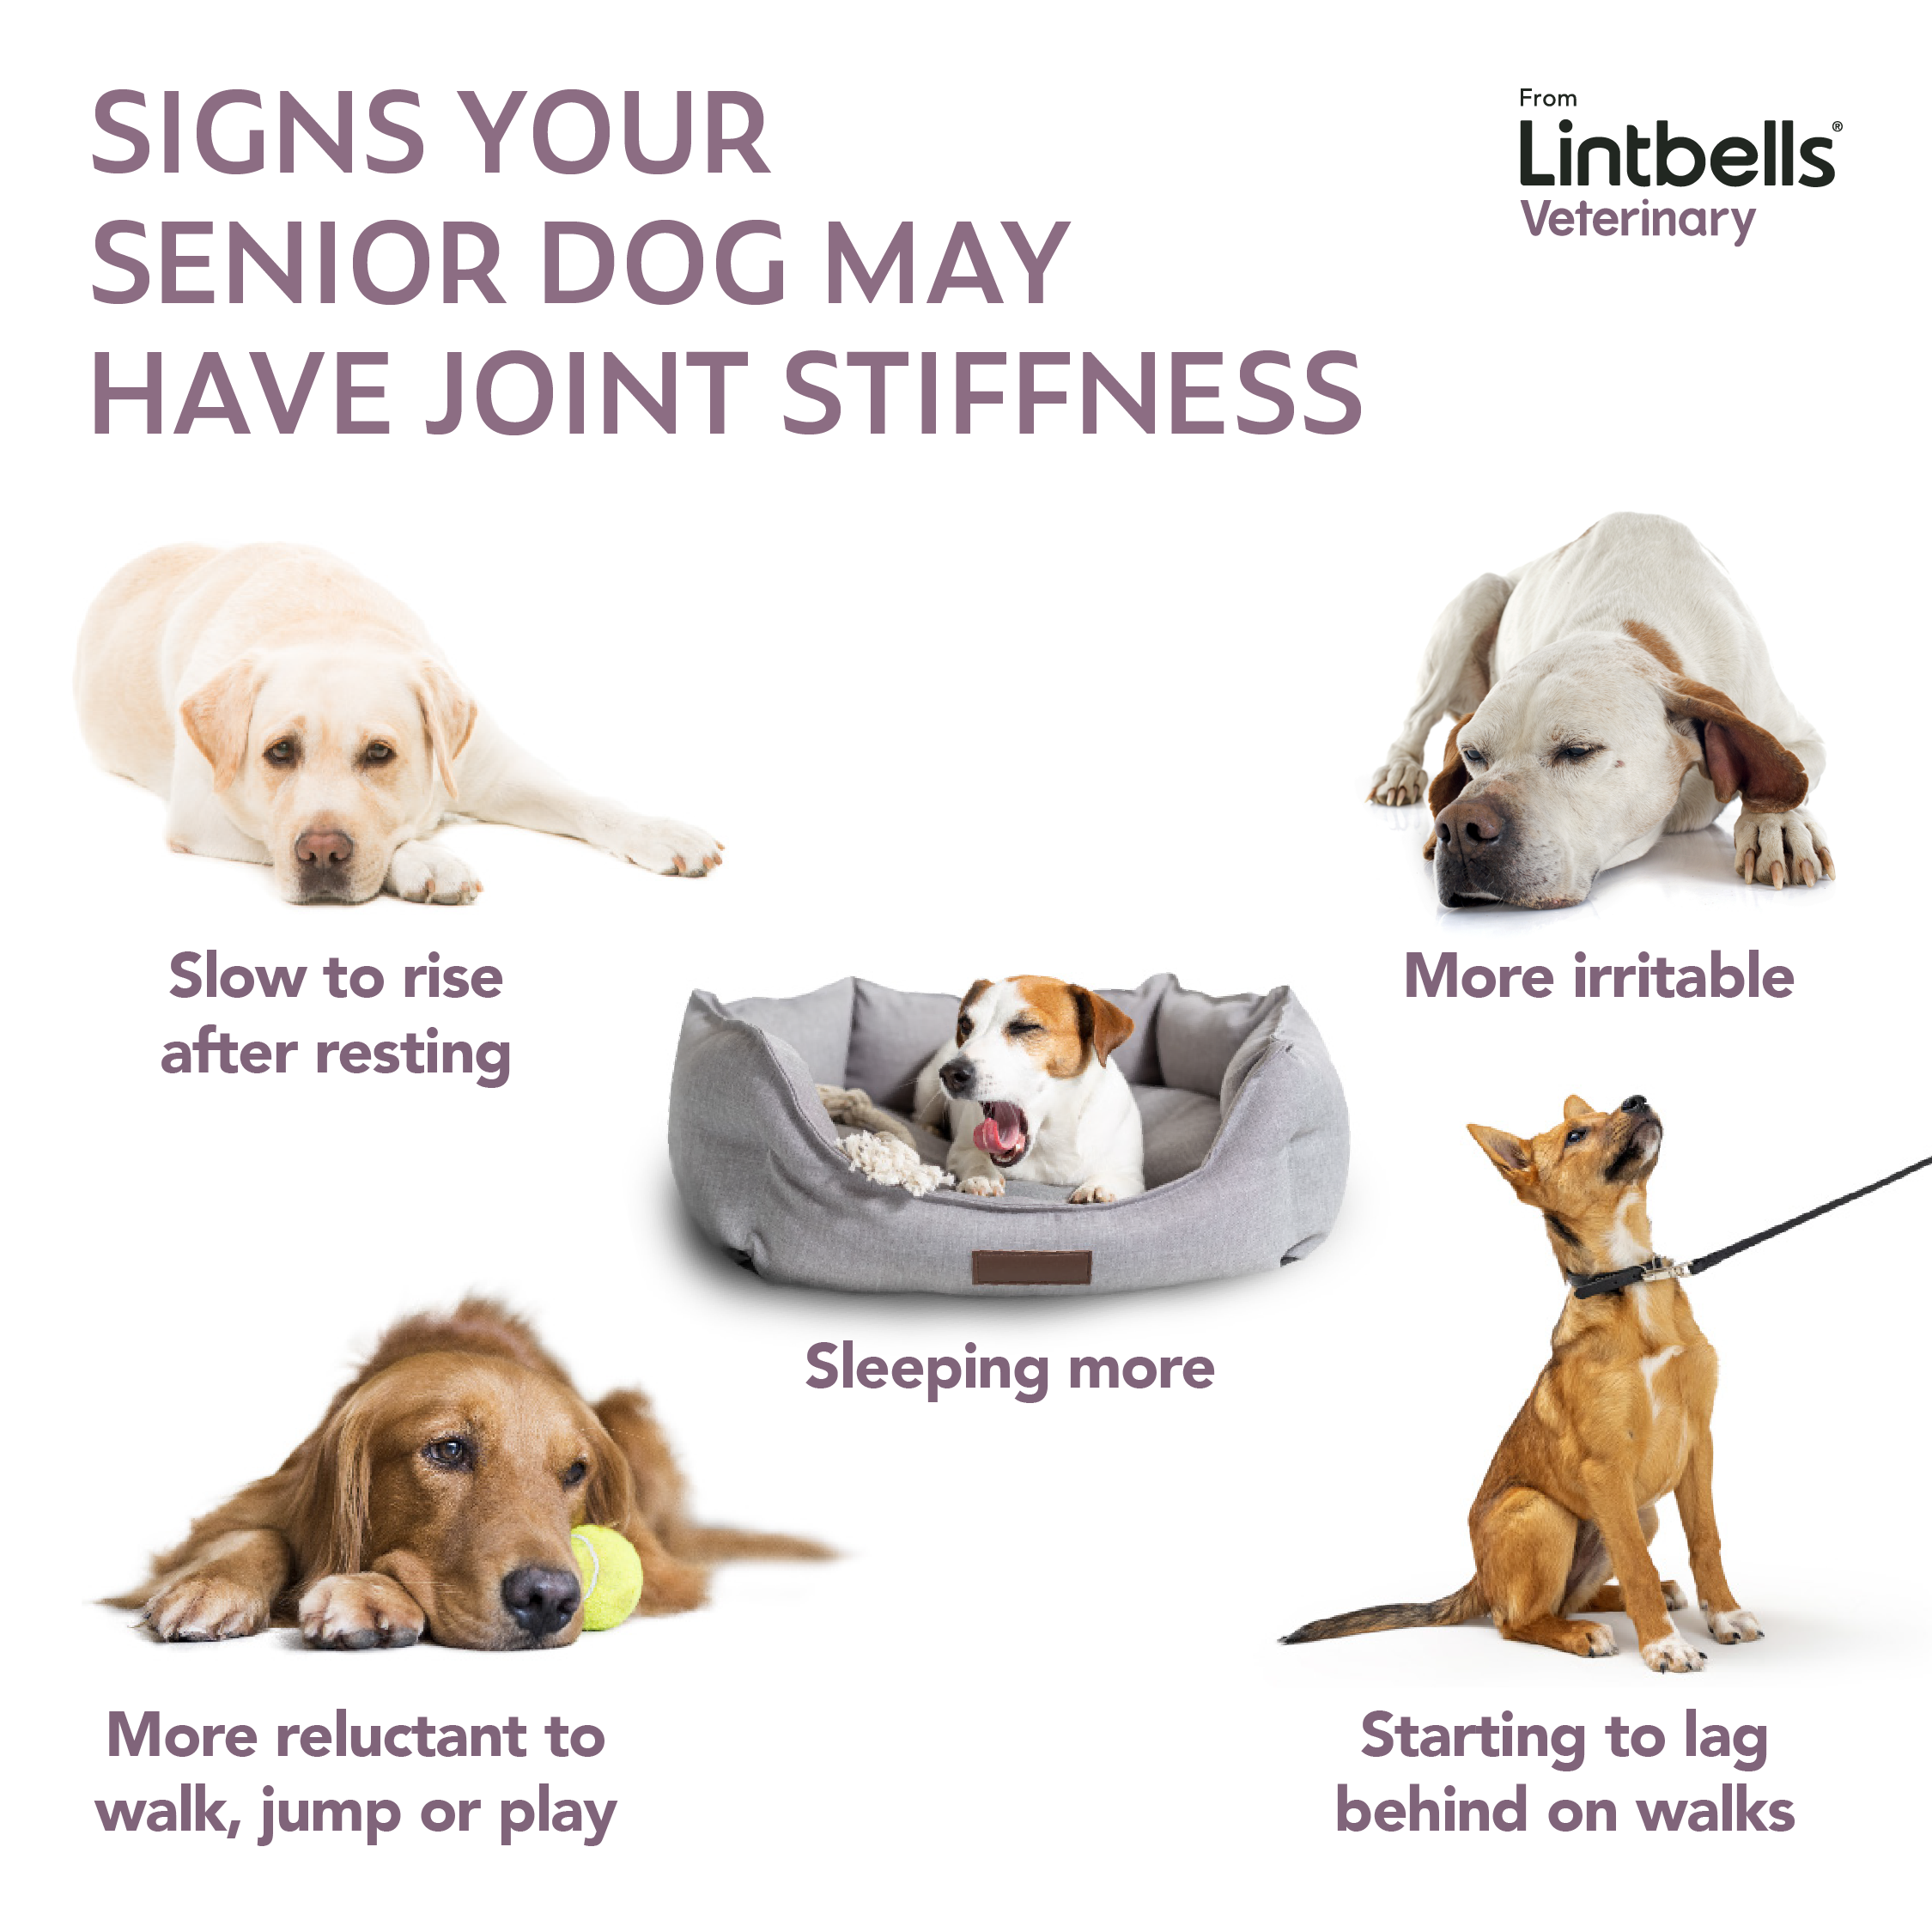 An infographic titled "Signs Your Senior Dog May Have Joint Stiffness" from Lintbells Veterinary, featuring images of dogs exhibiting indicators of joint stiffness: a Labrador lying down, a dog in a bed looking irritable, a dog with a ball looking lethargic, and a dog on a leash lagging behind. Text descriptors include "Slow to rise after resting," "More irritable," "Sleeping more," and "Starting to lag behind on walks."